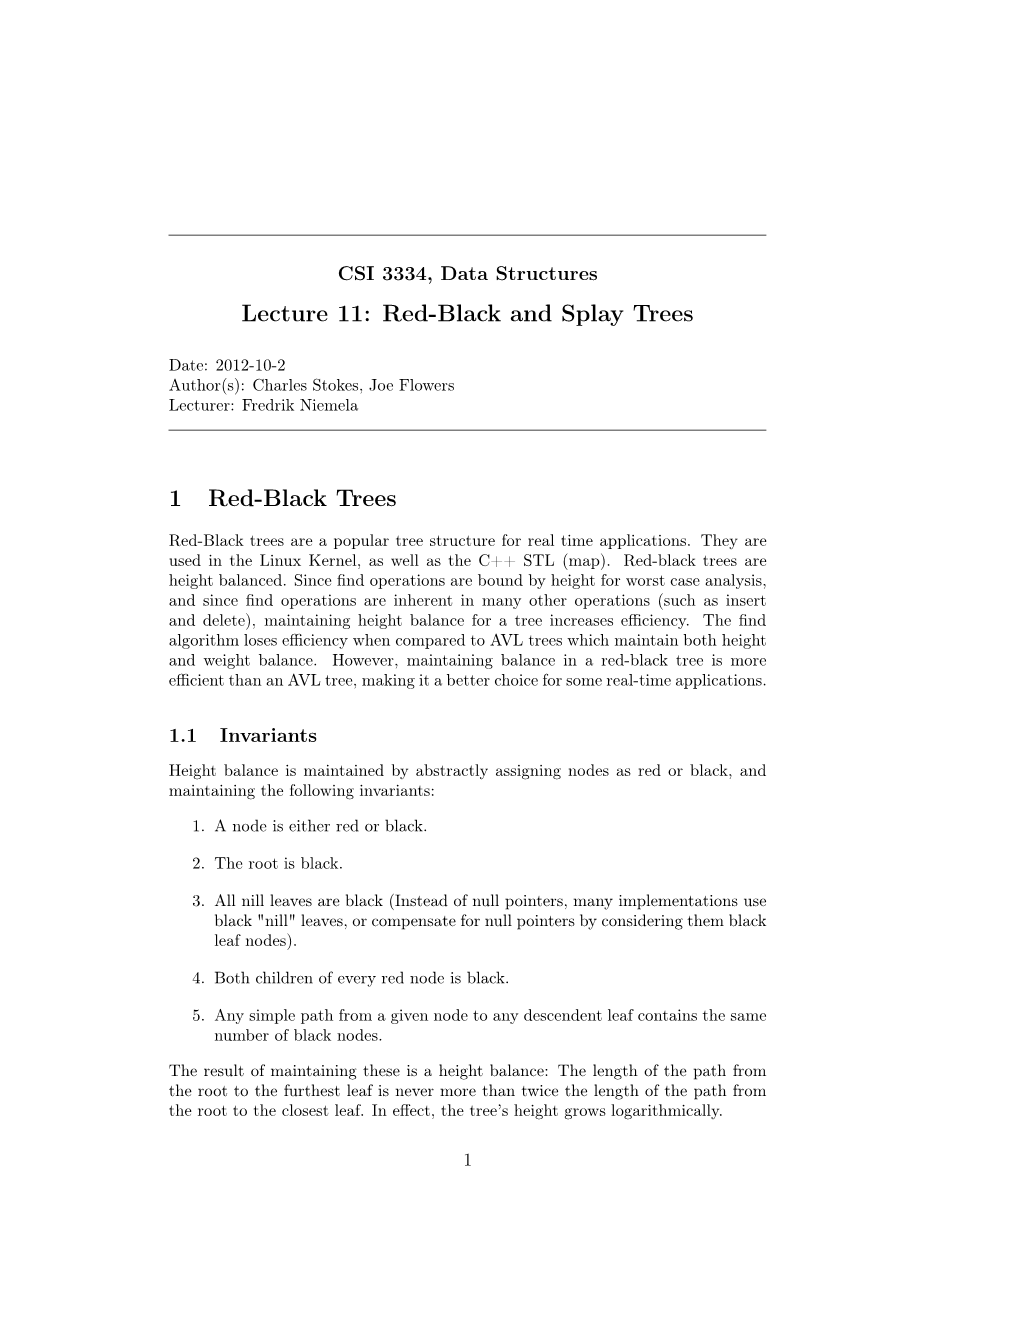 CSI 3334, Data Structures Lecture 11: Red-Black and Splay Trees